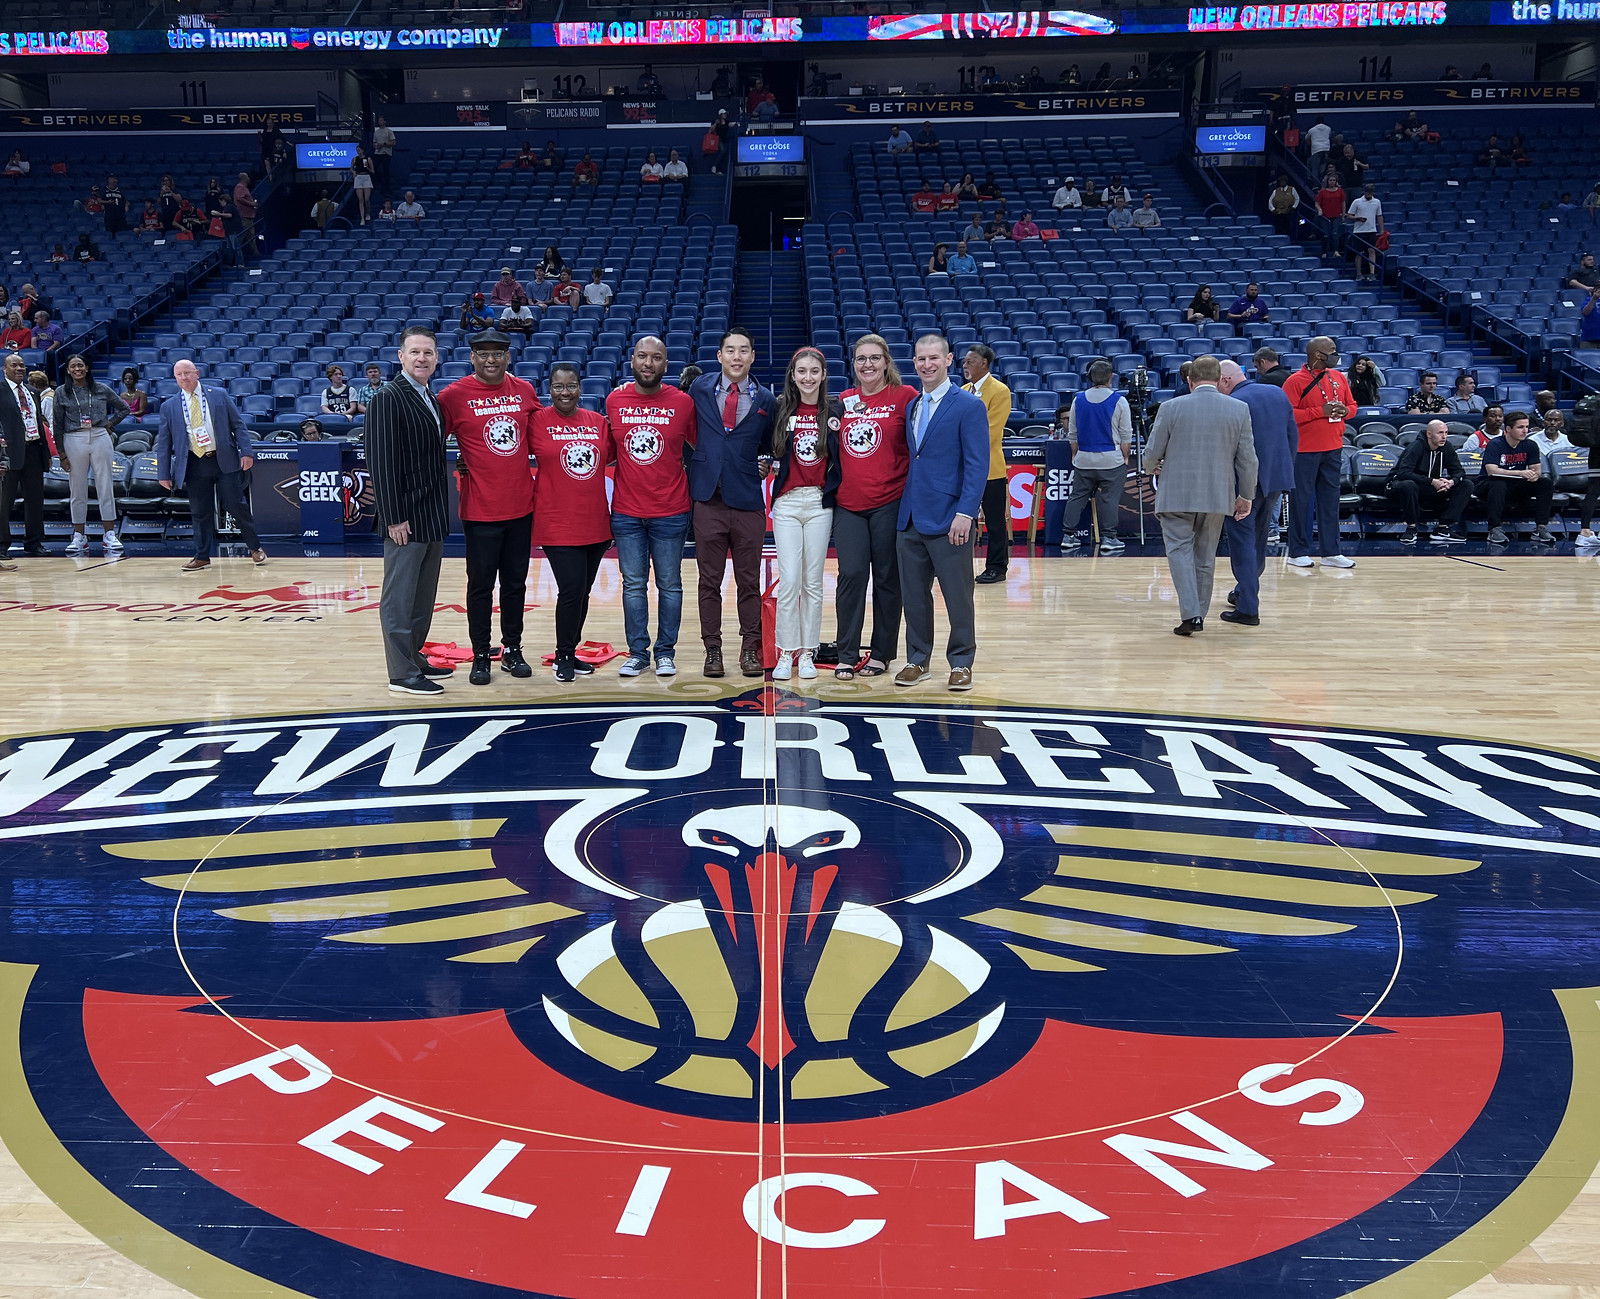 2023_t4t_TAPS t4t attend the New Orleans Pelicans NBA Referee_025.JPG